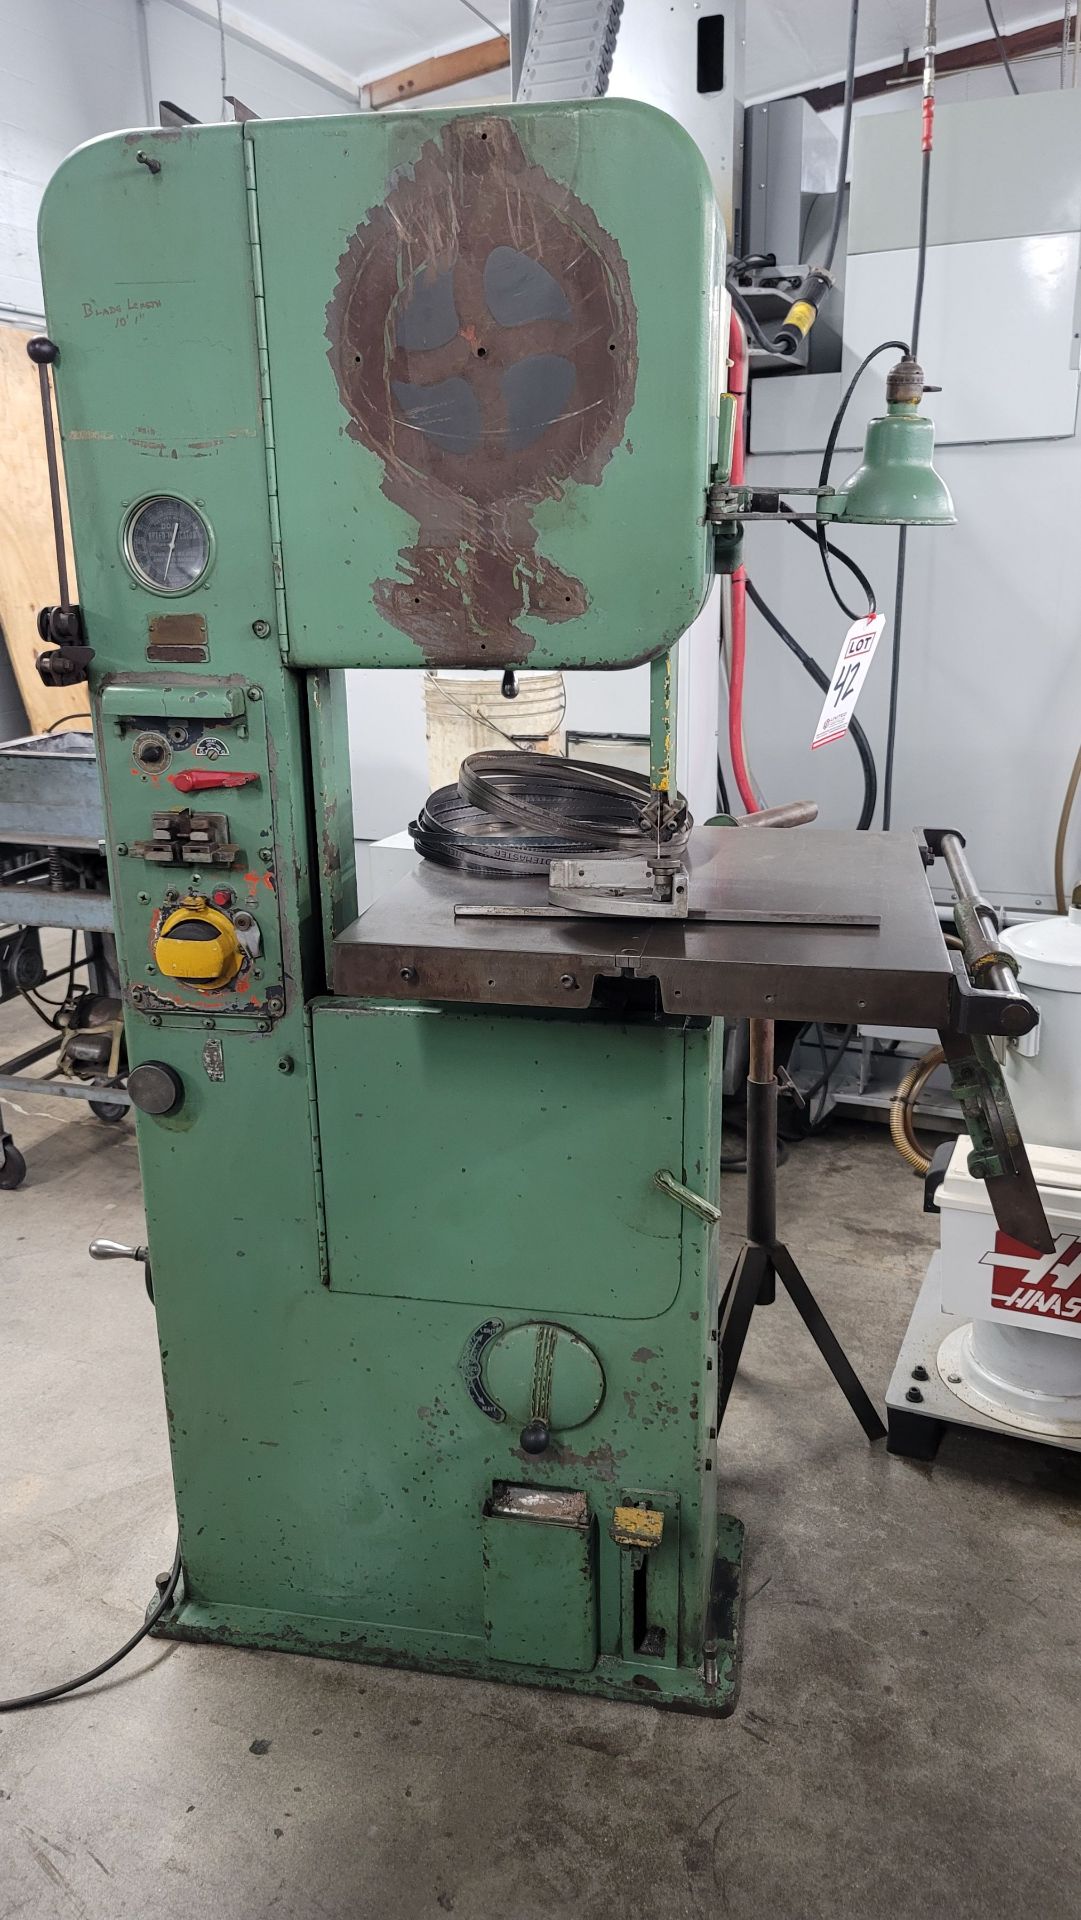 DOALL ML-16 VERTICAL BAND SAW, S/N 436154, W/ BLADE WELDER AND GRINDER - Image 2 of 4